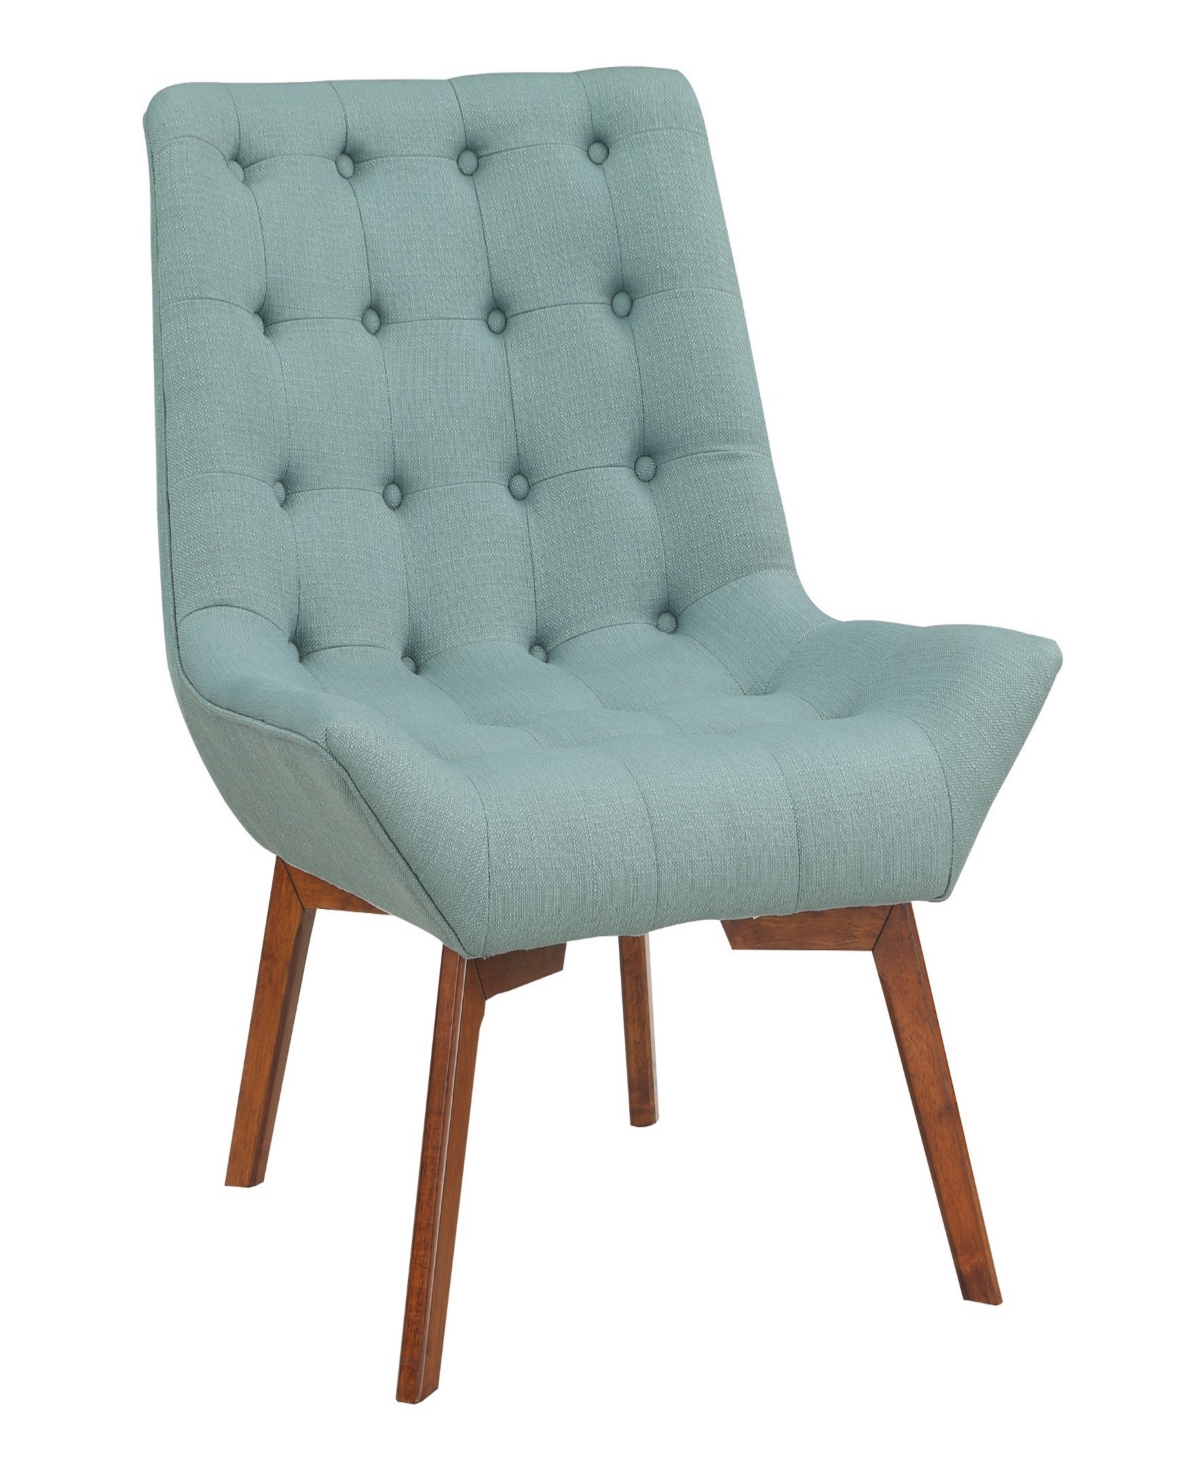 Shop Osp Home Furnishings Office Star 33.5" Wood, Fabric Shelly Tufted Chair In Sea